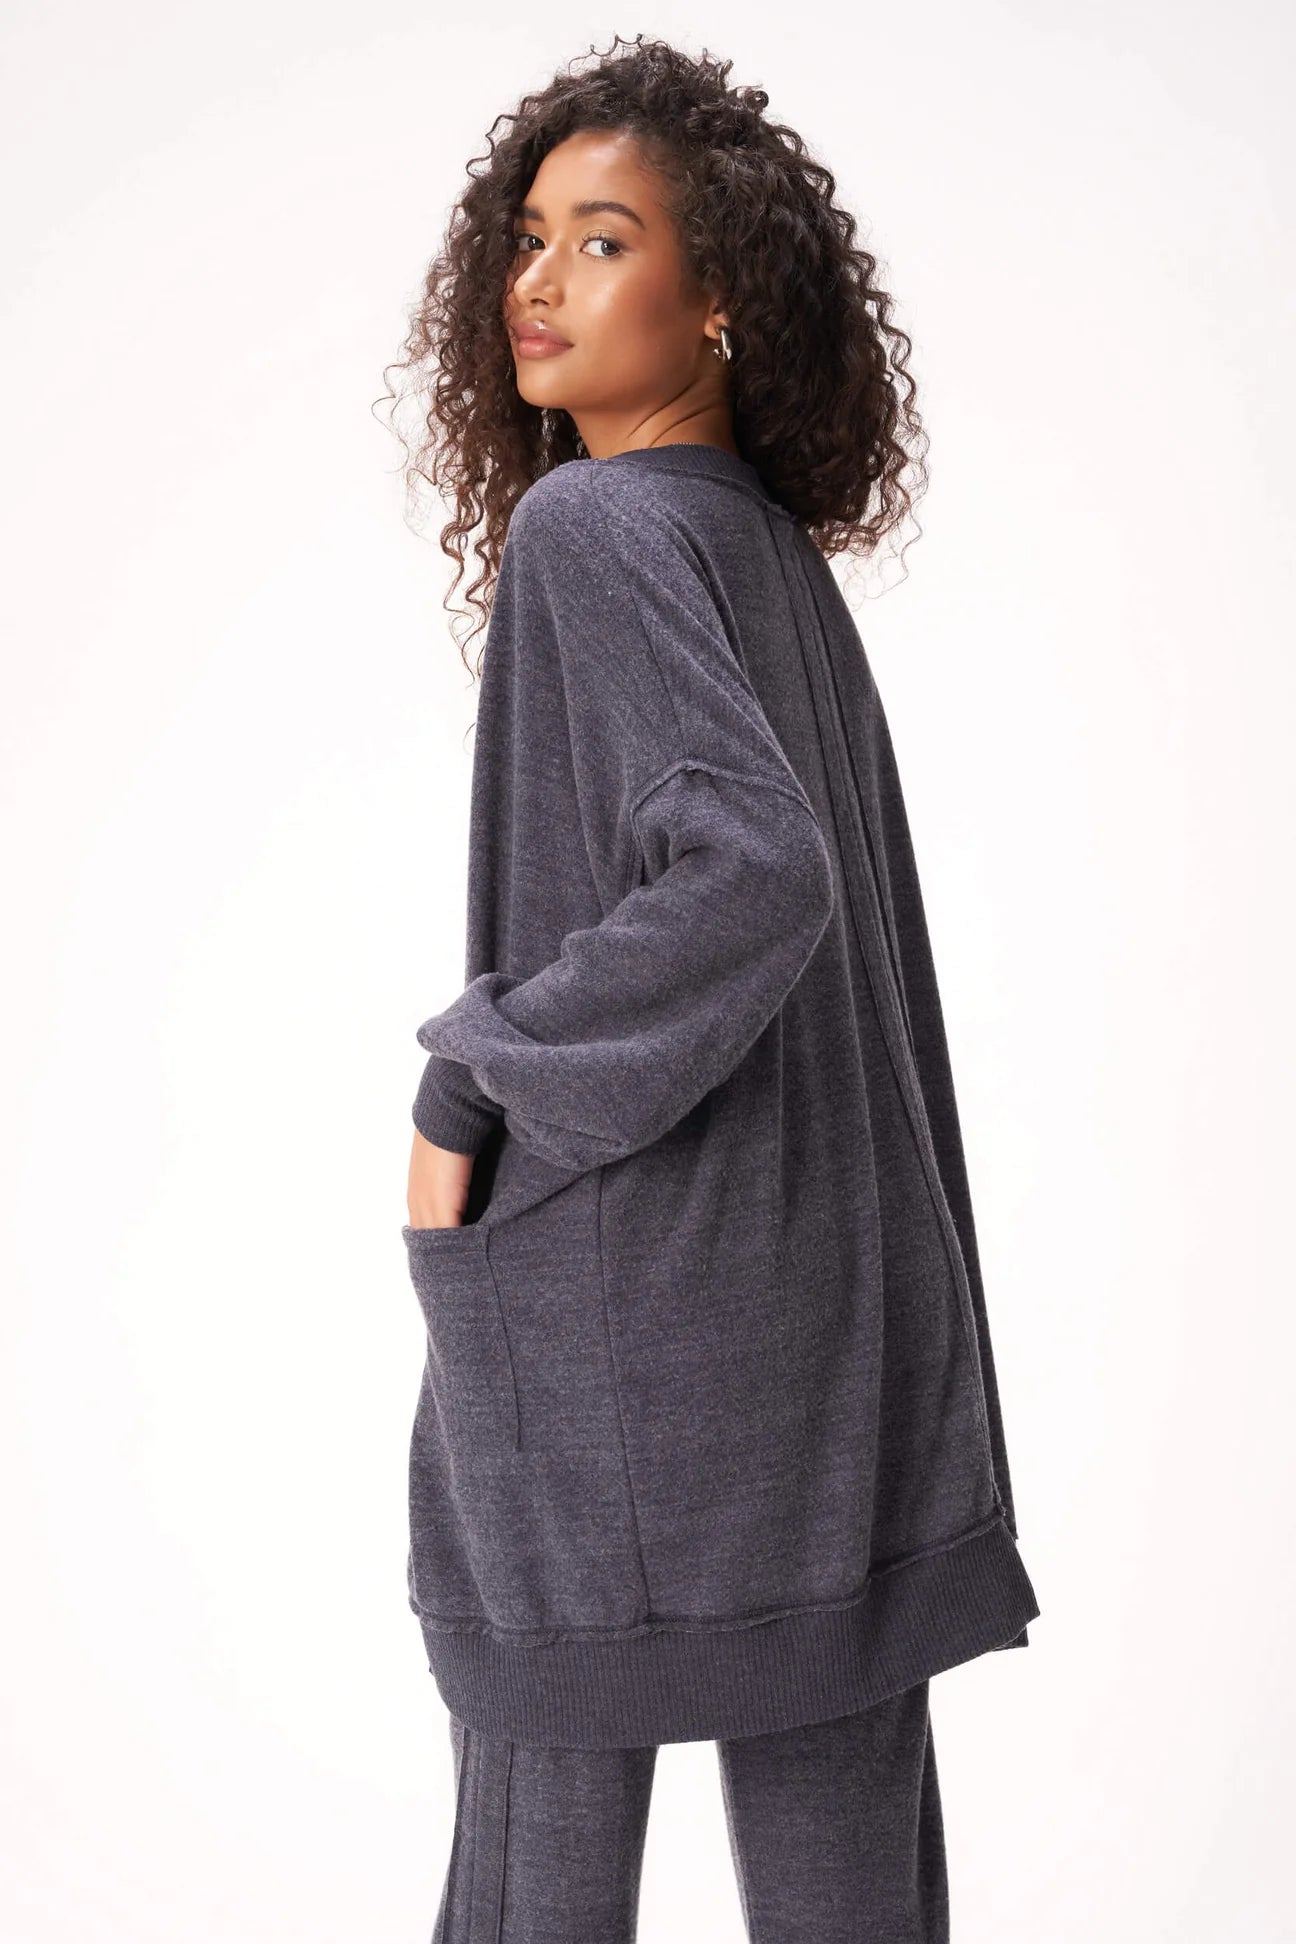 Just Relax Heathered Cozy Seamed Cardigan